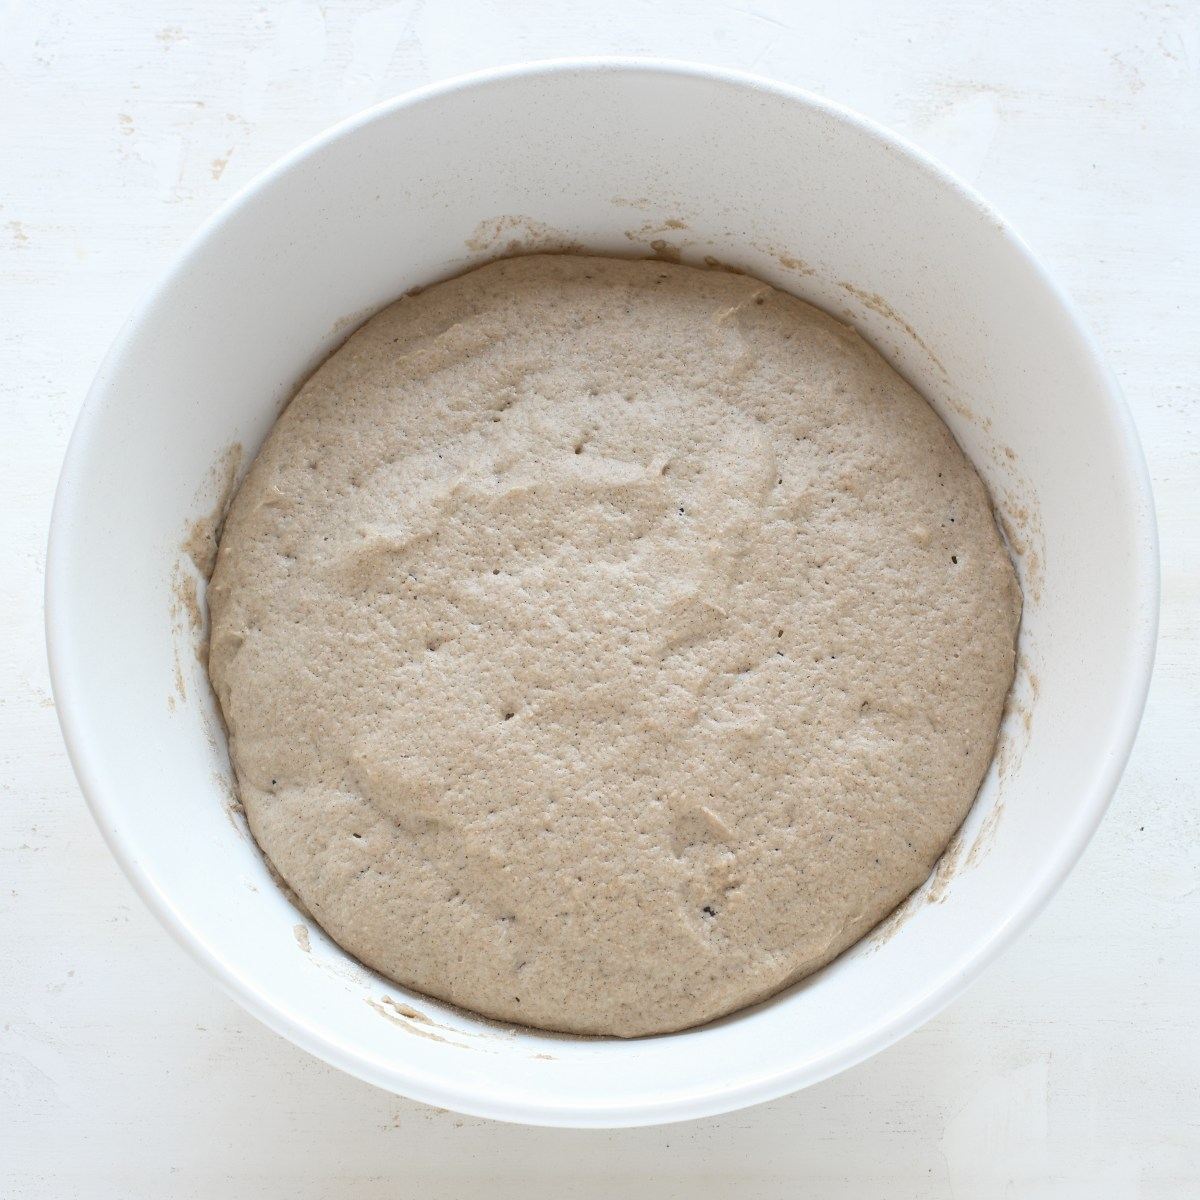 Raised yeast starter for rye bread, in a white bowl.